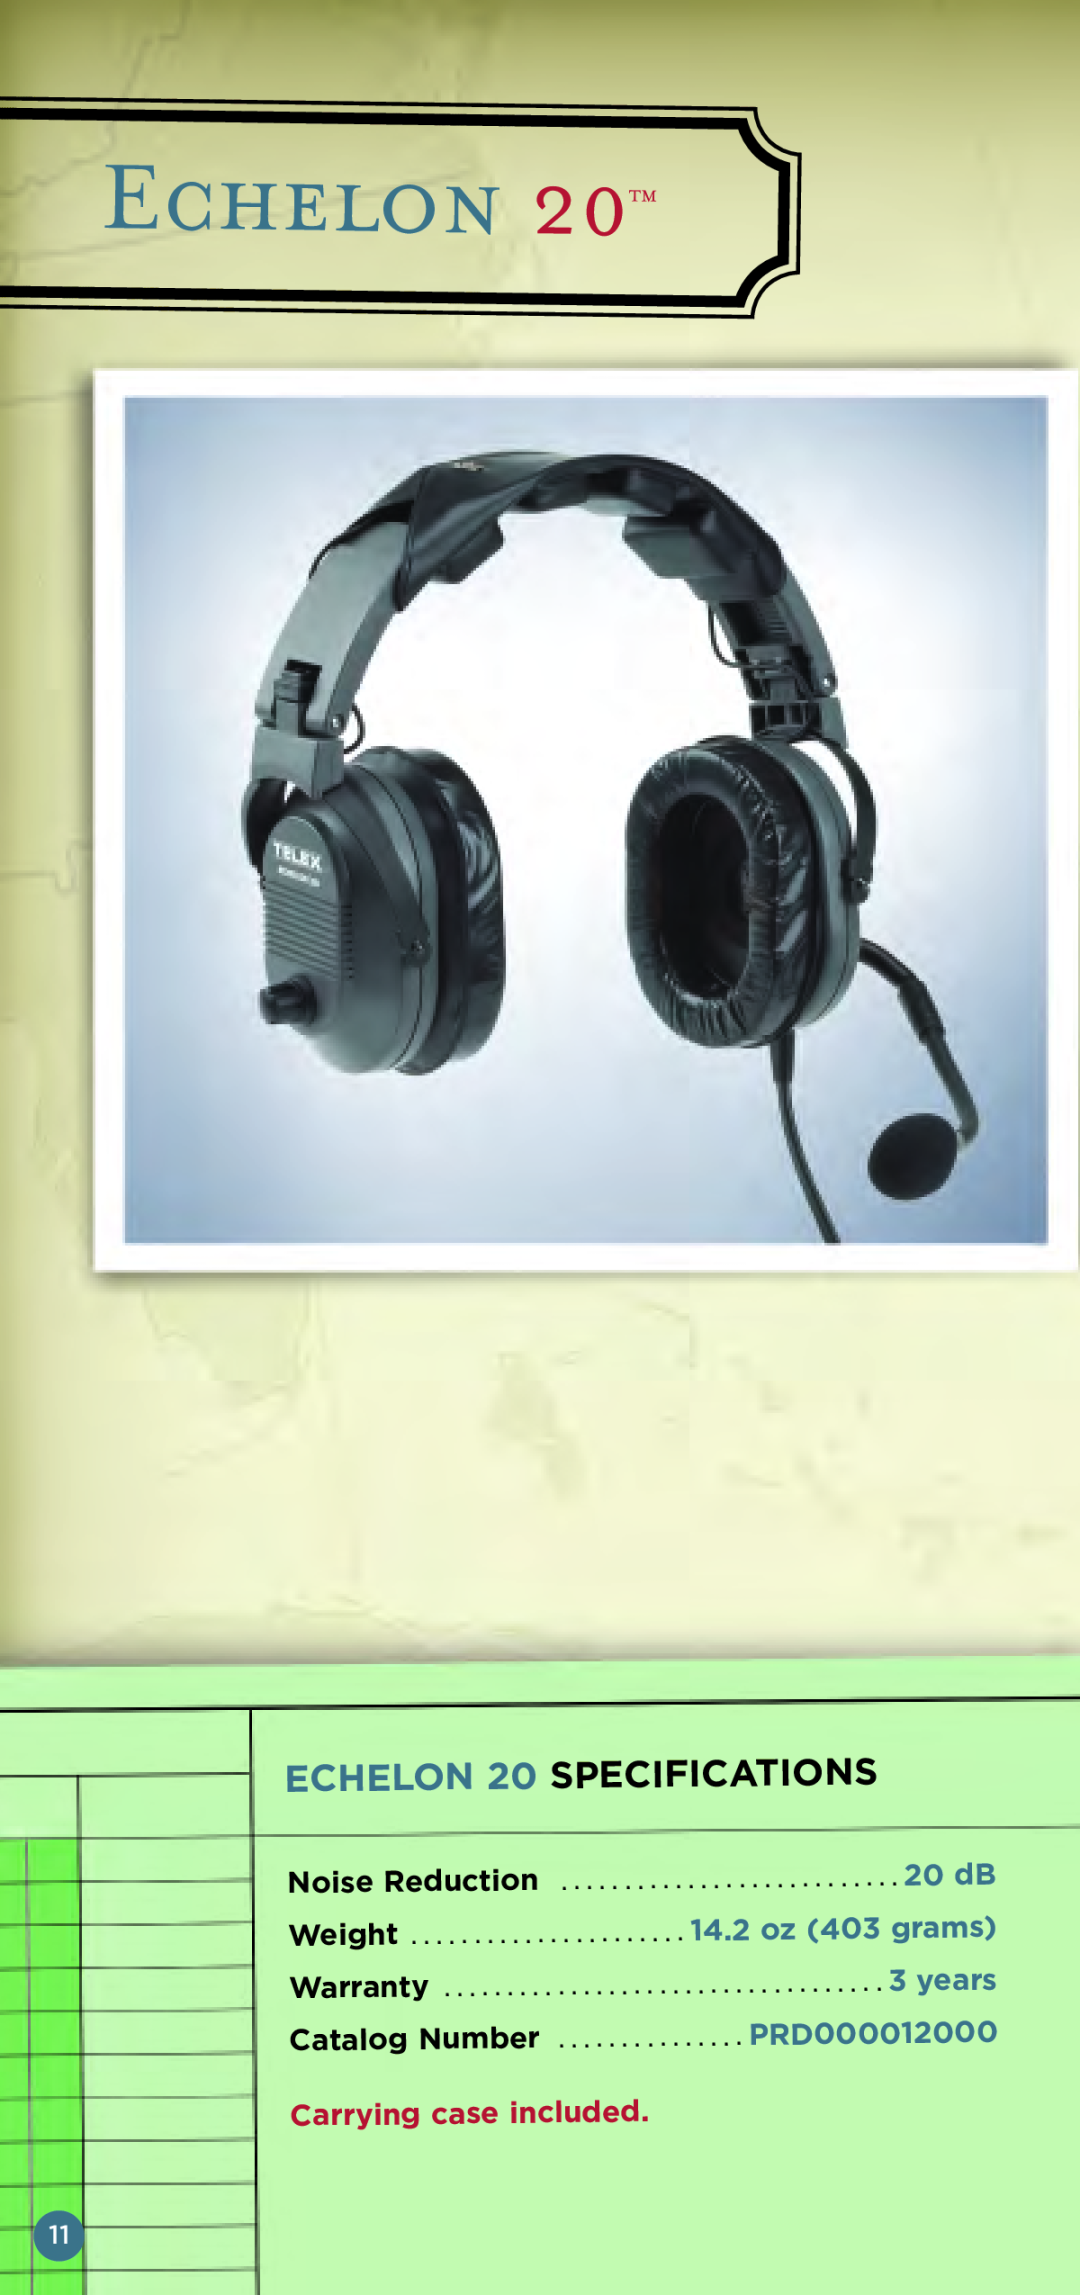 Telex Aviation Headsets Echelon, ECHELON 20 SPECIFICA, Tions, 14.2 oz 403 grams, PRD000012000, Carrying case included 